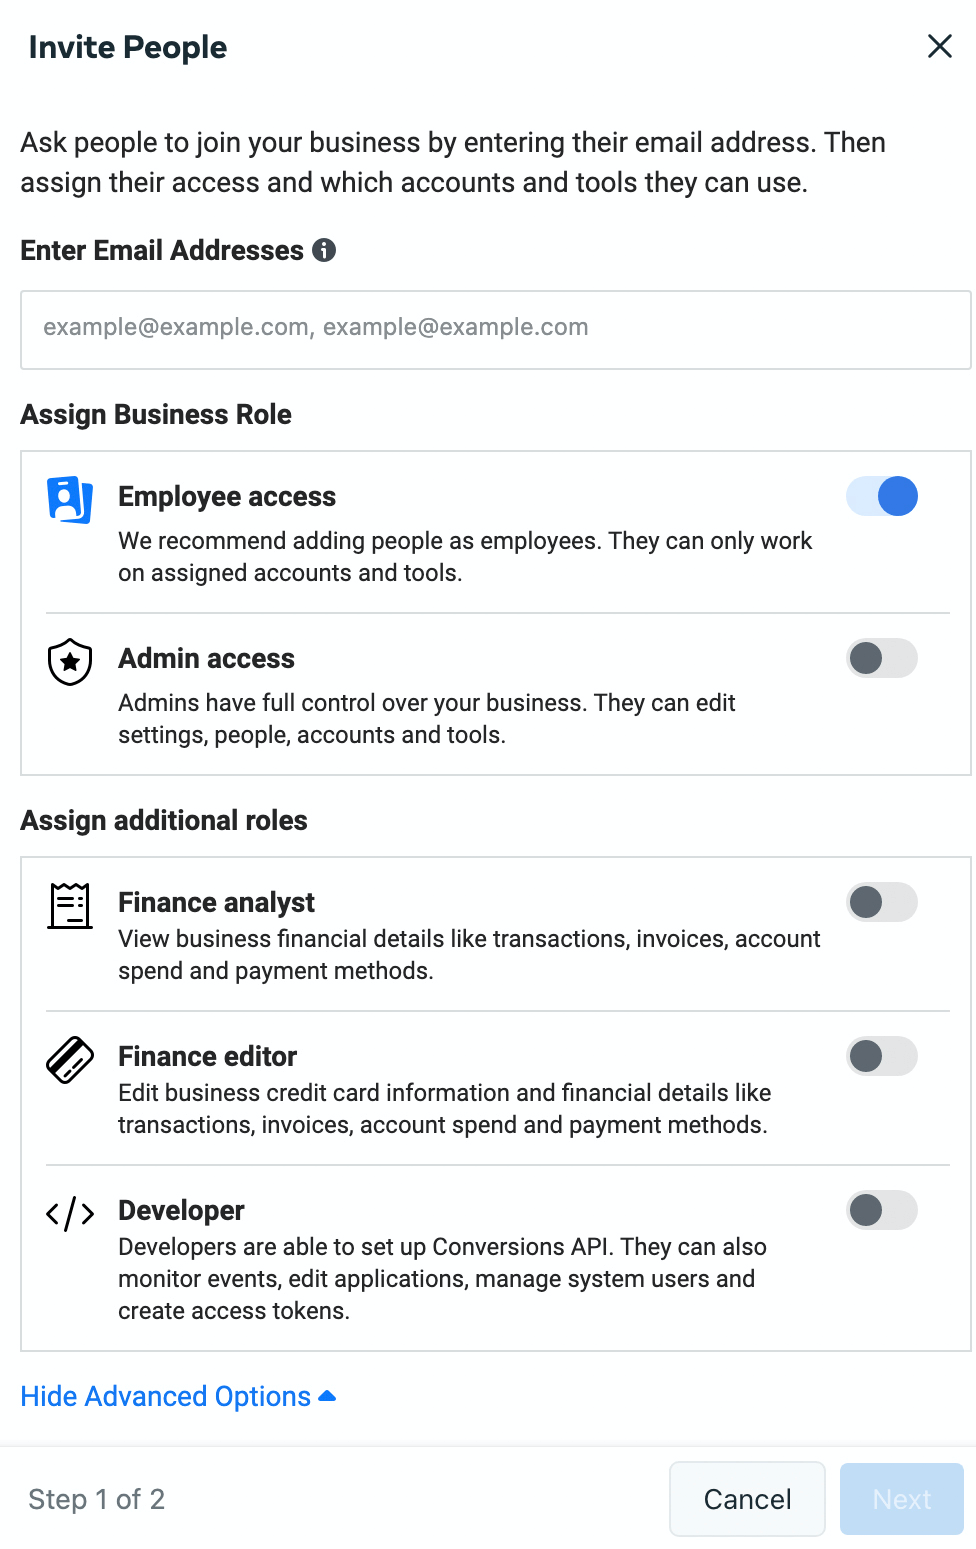 How To Remove Meta Business Suite From Facebook Page?